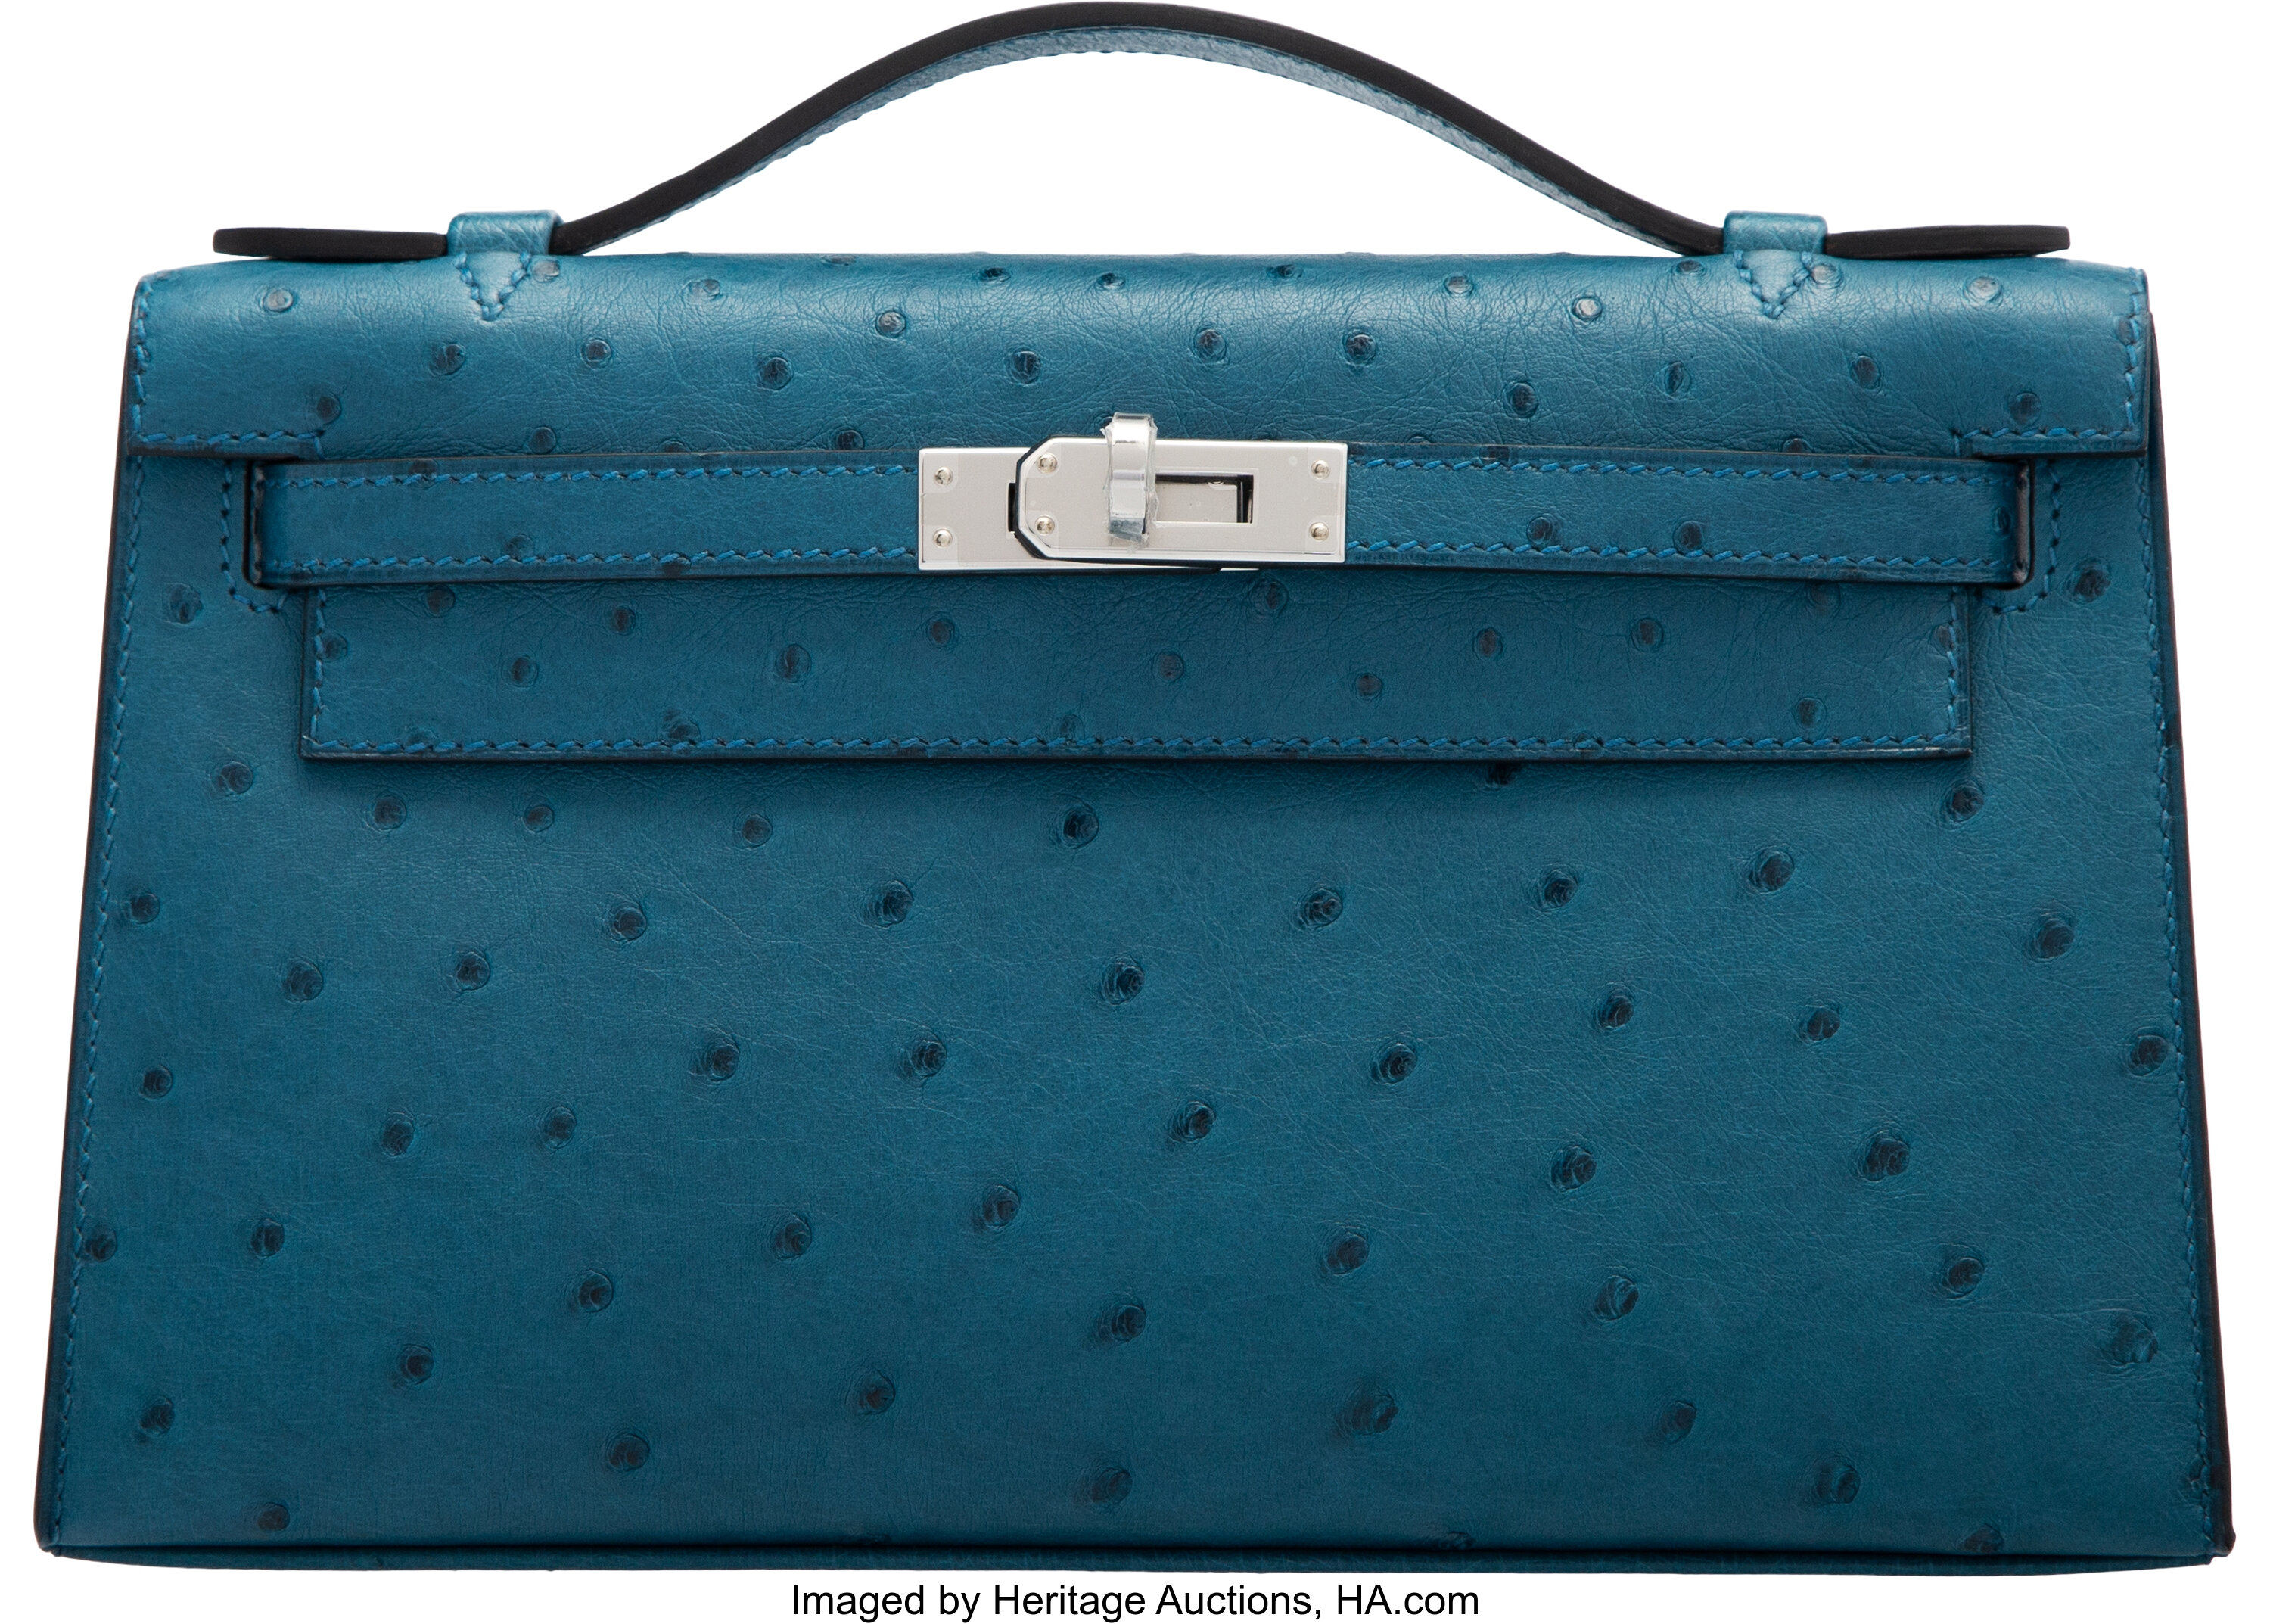 Krisdayantilemos using #Hermes so kelly 22 turquoise ostrich & toile with  palladium hardware - limited edition (hermes…